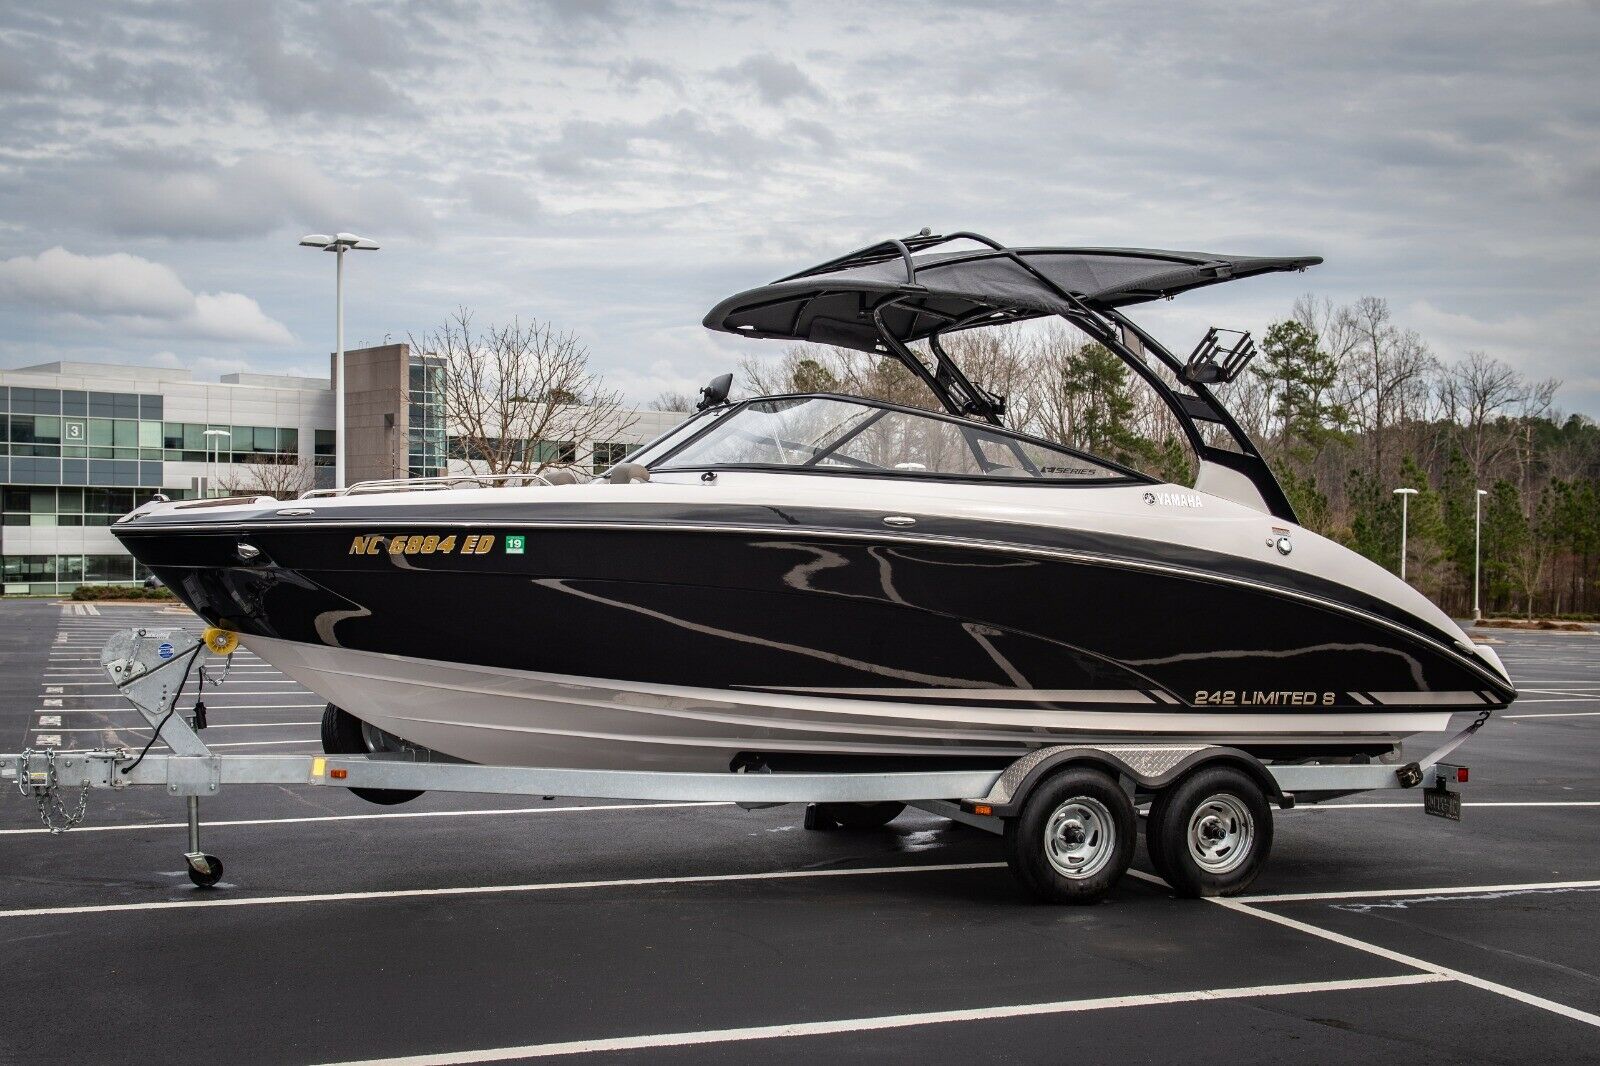 yamaha-242-limited-s-2016-for-sale-for-55-000-boats-from-usa